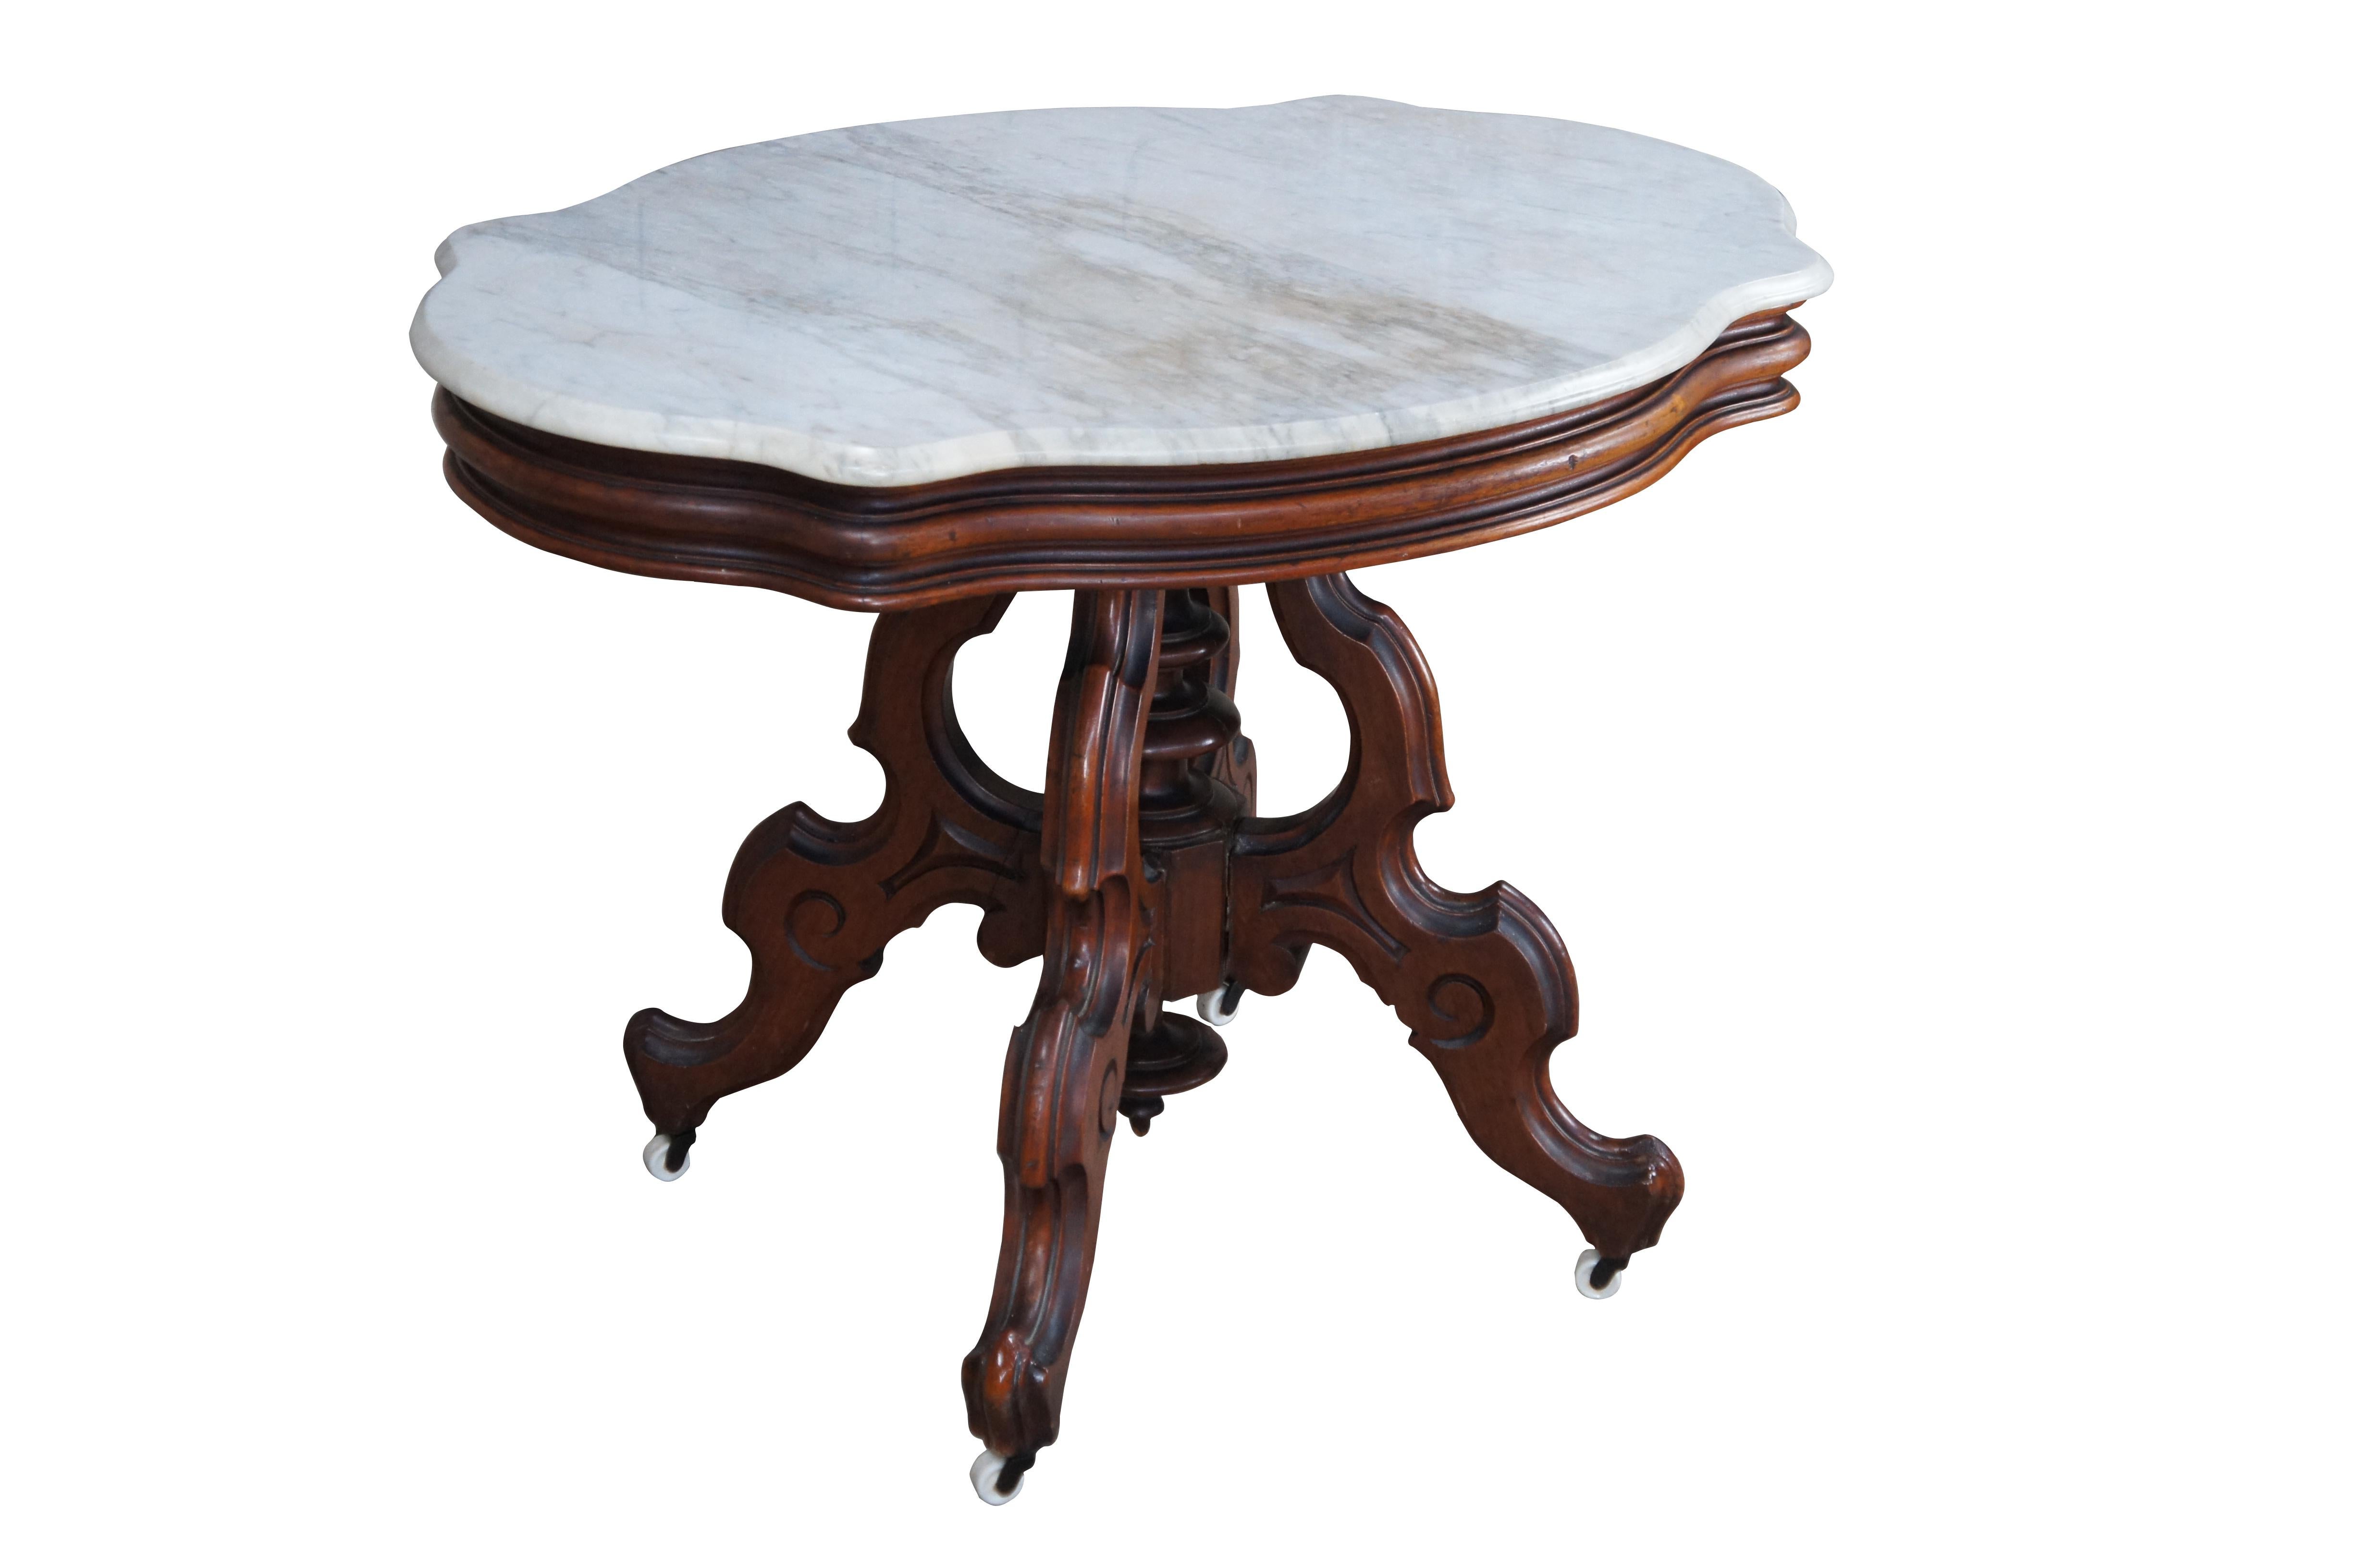 Antique 19th century Victorian Eastlake parlor table. Made from walnut featuring serpentine oval form with beveled marble top supported by turned center support with down finial and four serpentine carved legs over castors.

Dimensions:
38